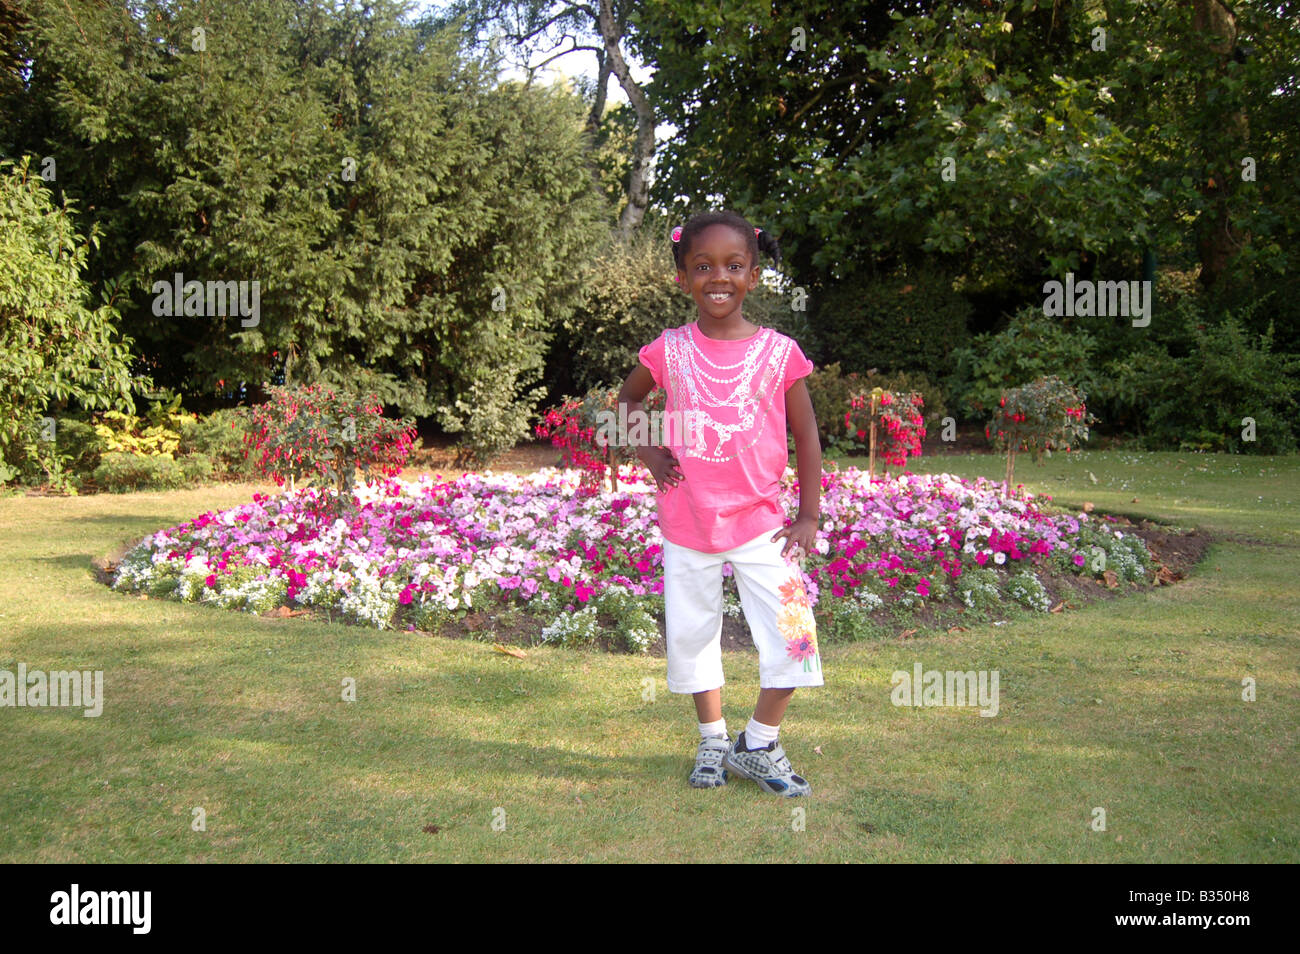 Smiling girl in Parc bois rond, taquin, Londres, Angleterre Banque D'Images